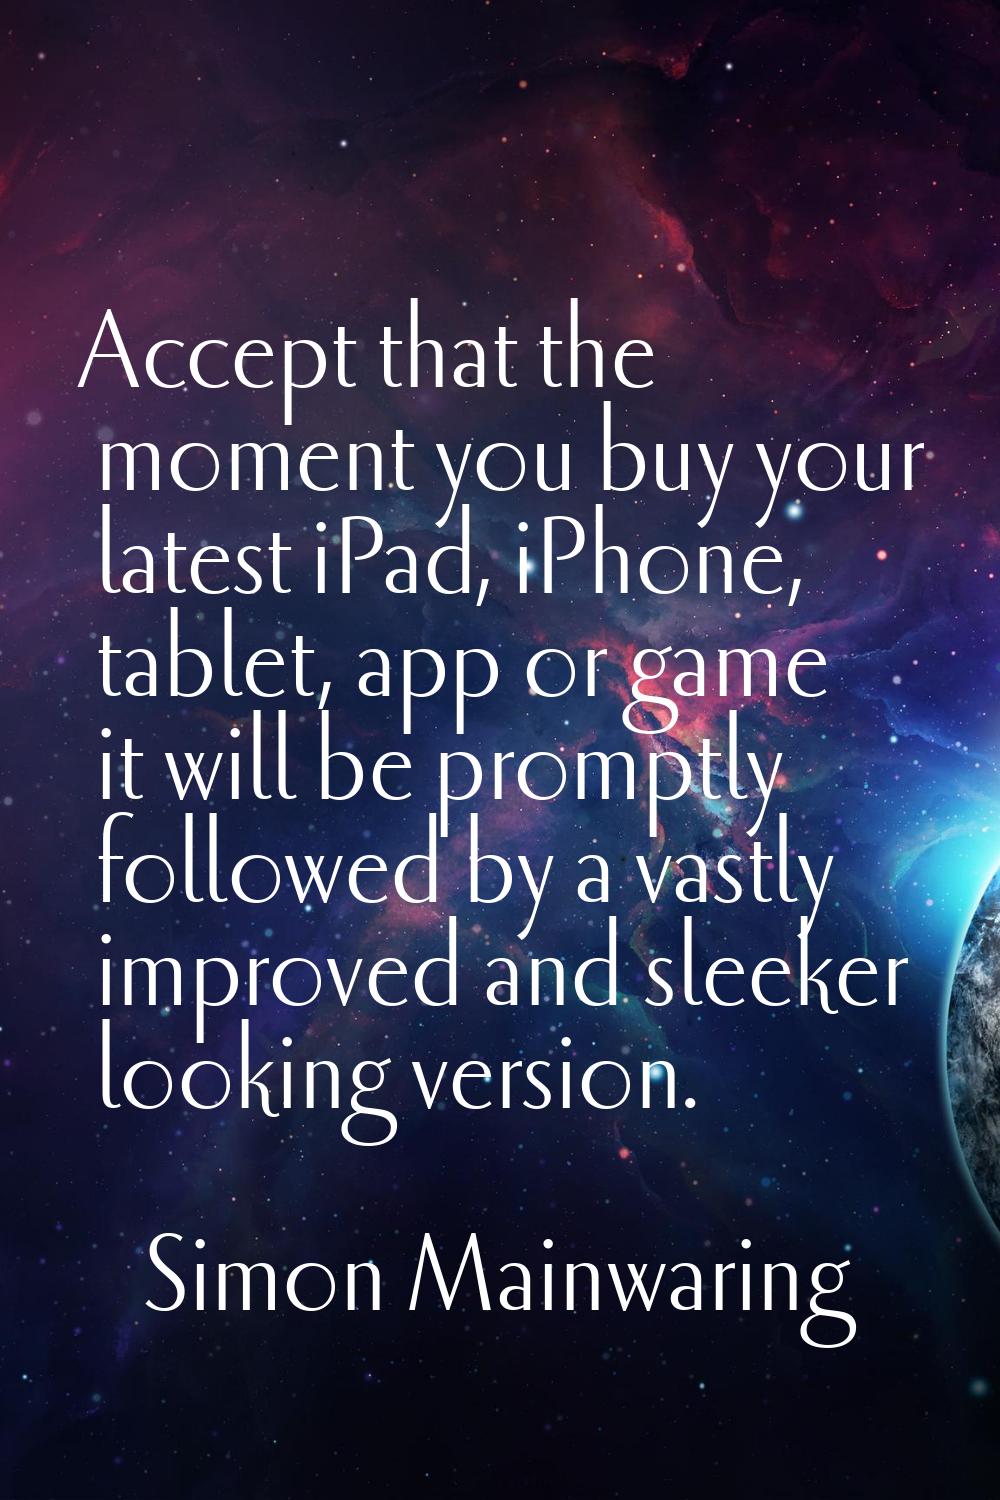 Accept that the moment you buy your latest iPad, iPhone, tablet, app or game it will be promptly fo